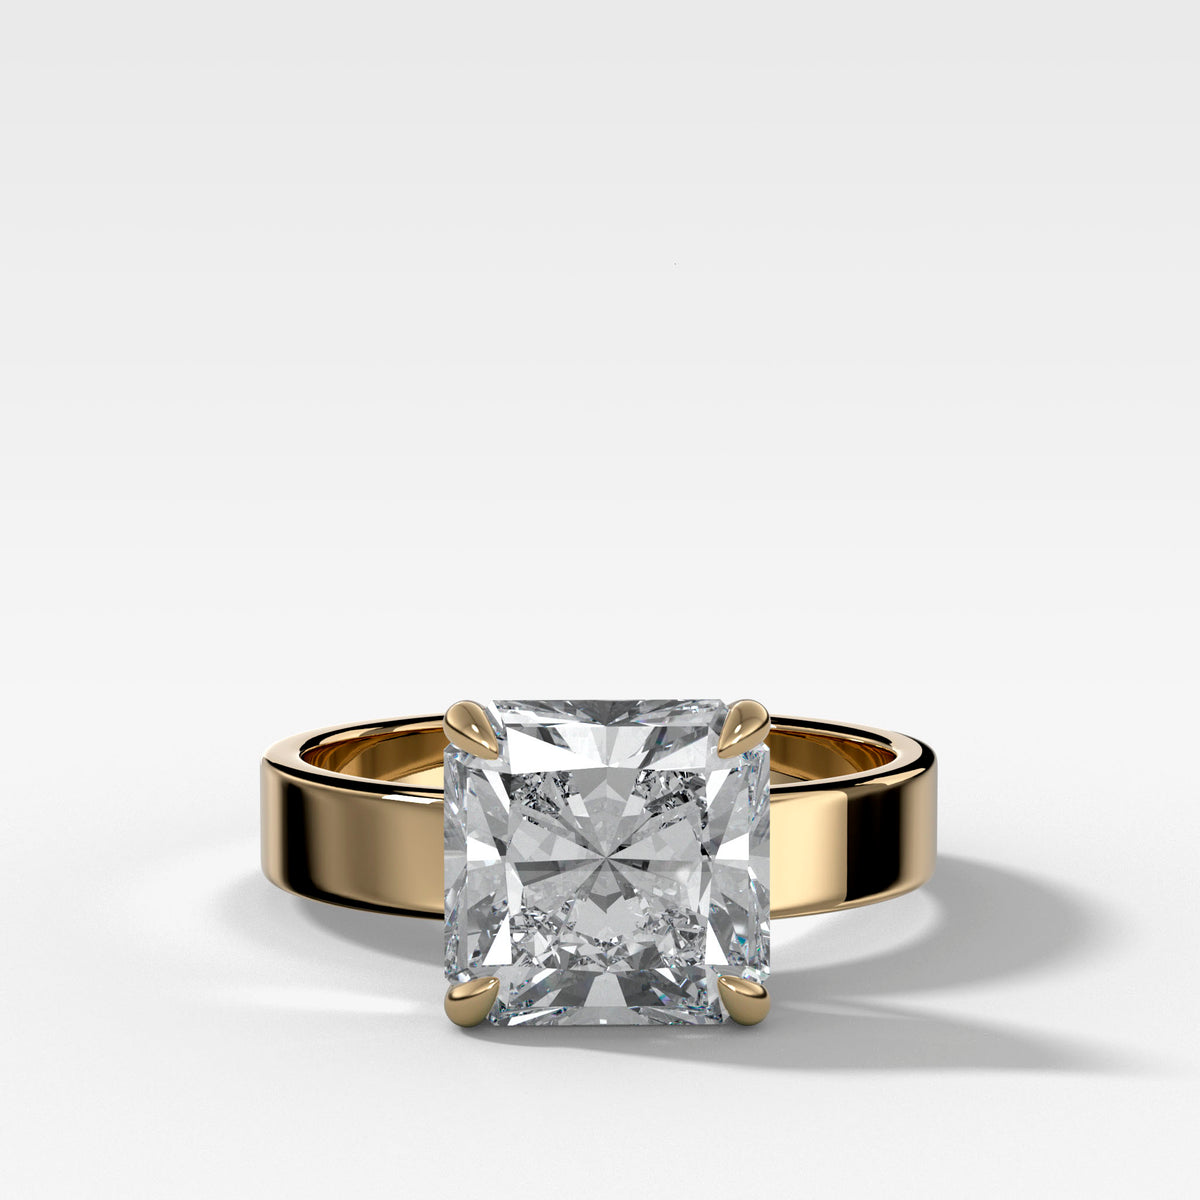 Finest Solitaire Engagement Ring With Radiant Square Cut Diamond